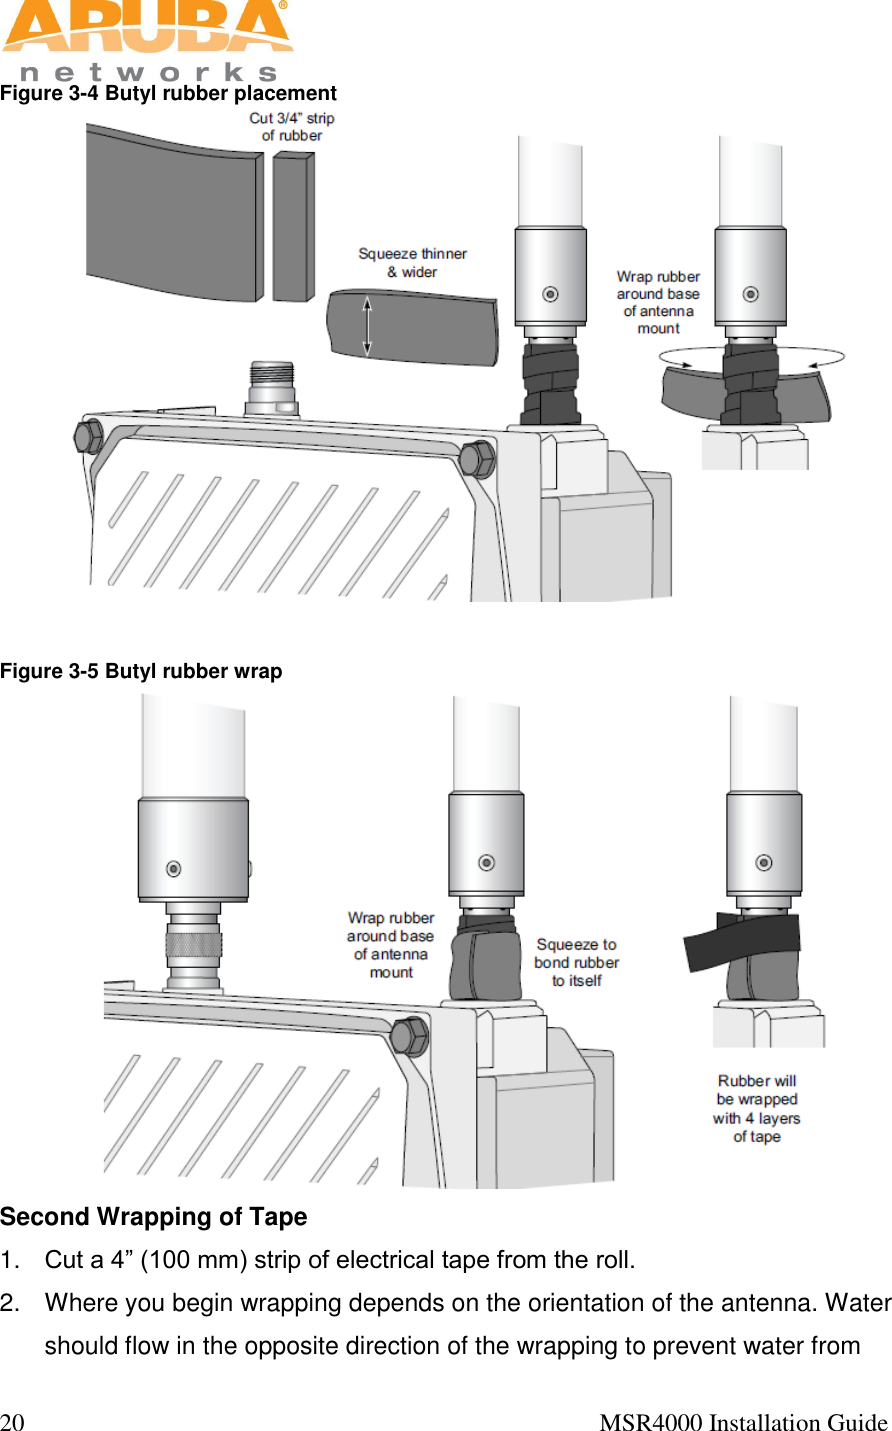  20                                                                                            MSR4000 Installation Guide   Figure 3-4 Butyl rubber placement   Figure 3-5 Butyl rubber wrap  Second Wrapping of Tape 1. Cut a 4” (100 mm) strip of electrical tape from the roll. 2.  Where you begin wrapping depends on the orientation of the antenna. Water should flow in the opposite direction of the wrapping to prevent water from 